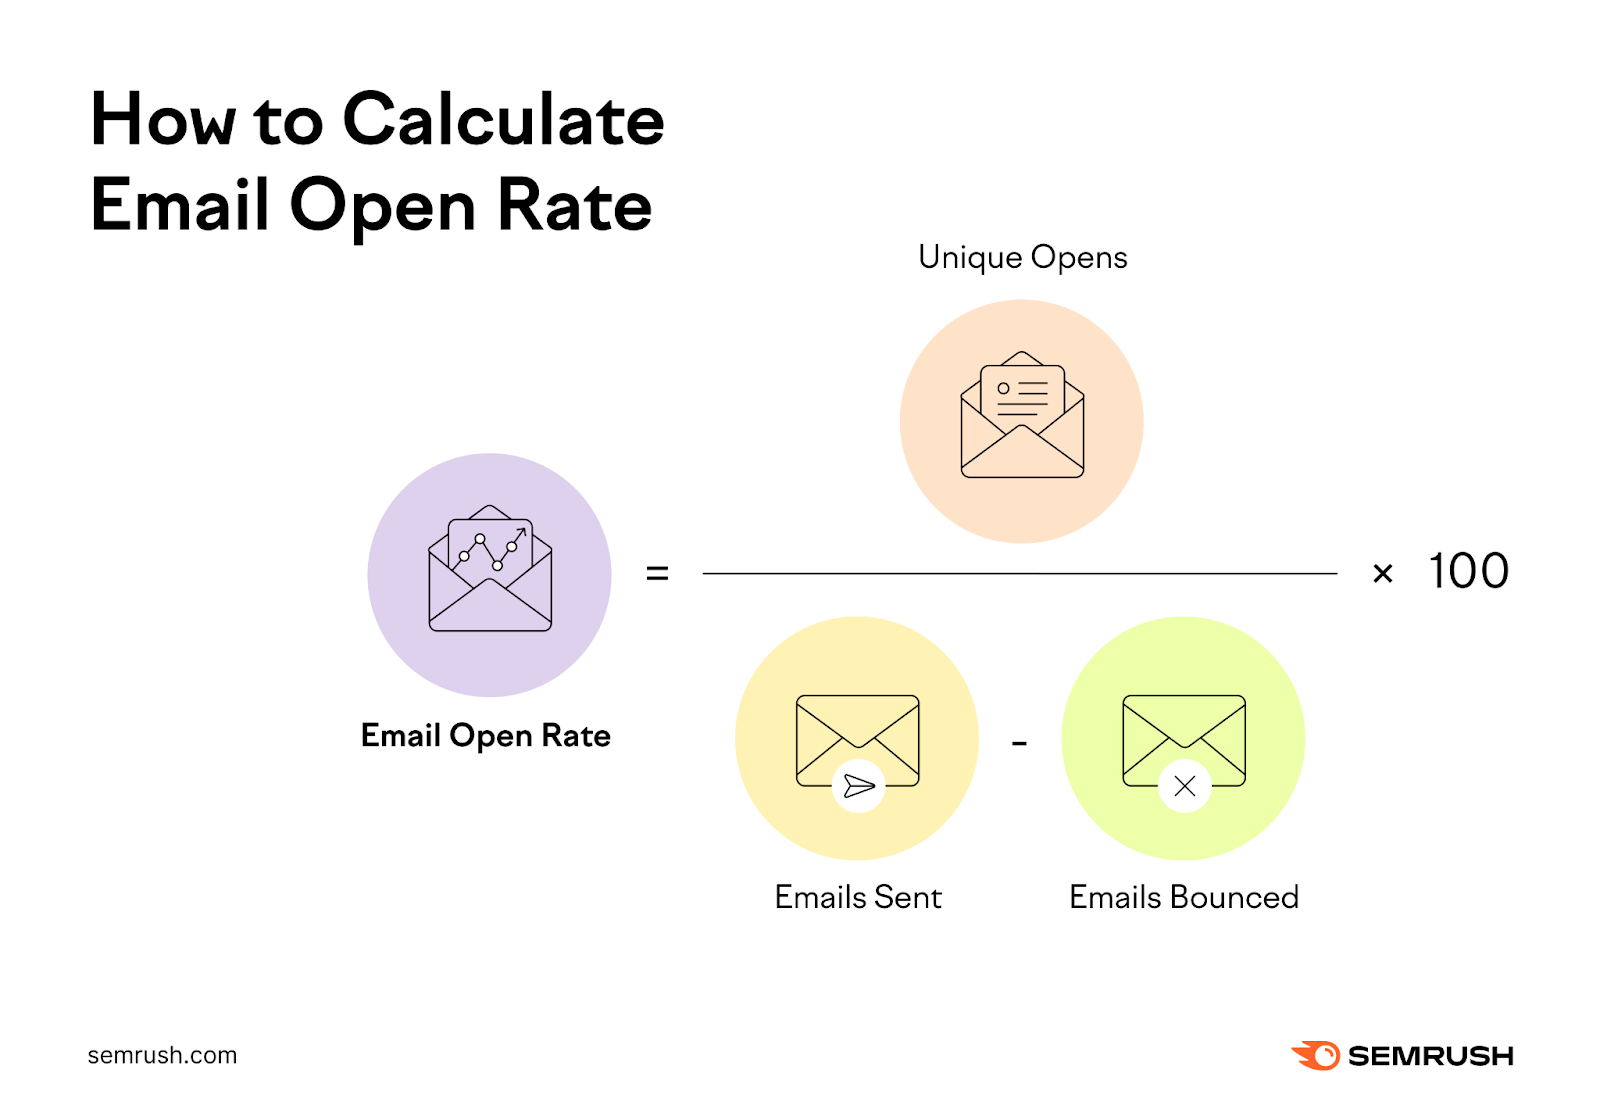 Email unfastened  complaint   equals unsocial   opens divided by the full   of emails sent minus the fig   of emails bounced. Then multiply the full   by 100.